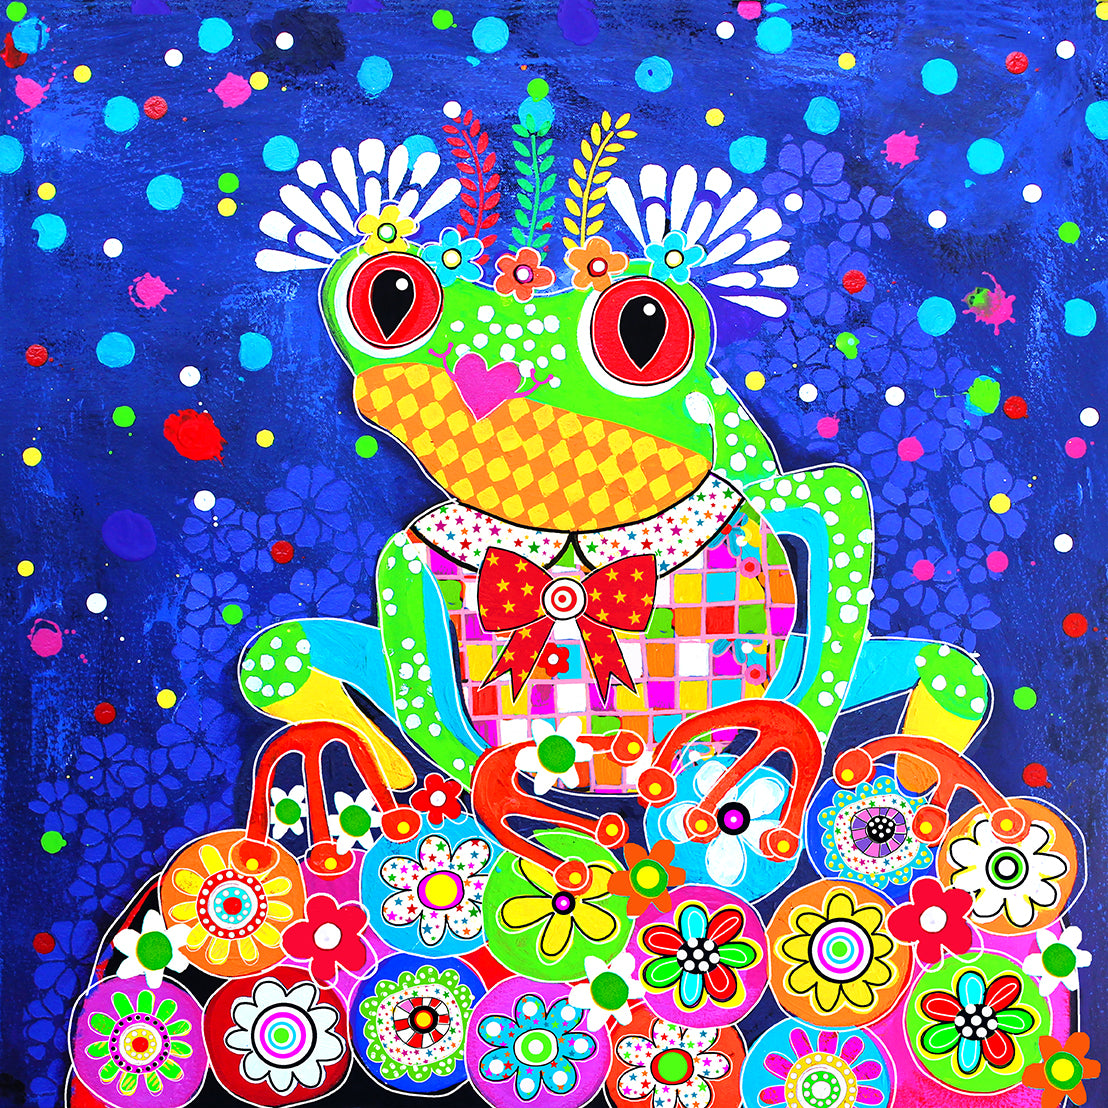 Original Painting - Bubbles - Green Tree Frog